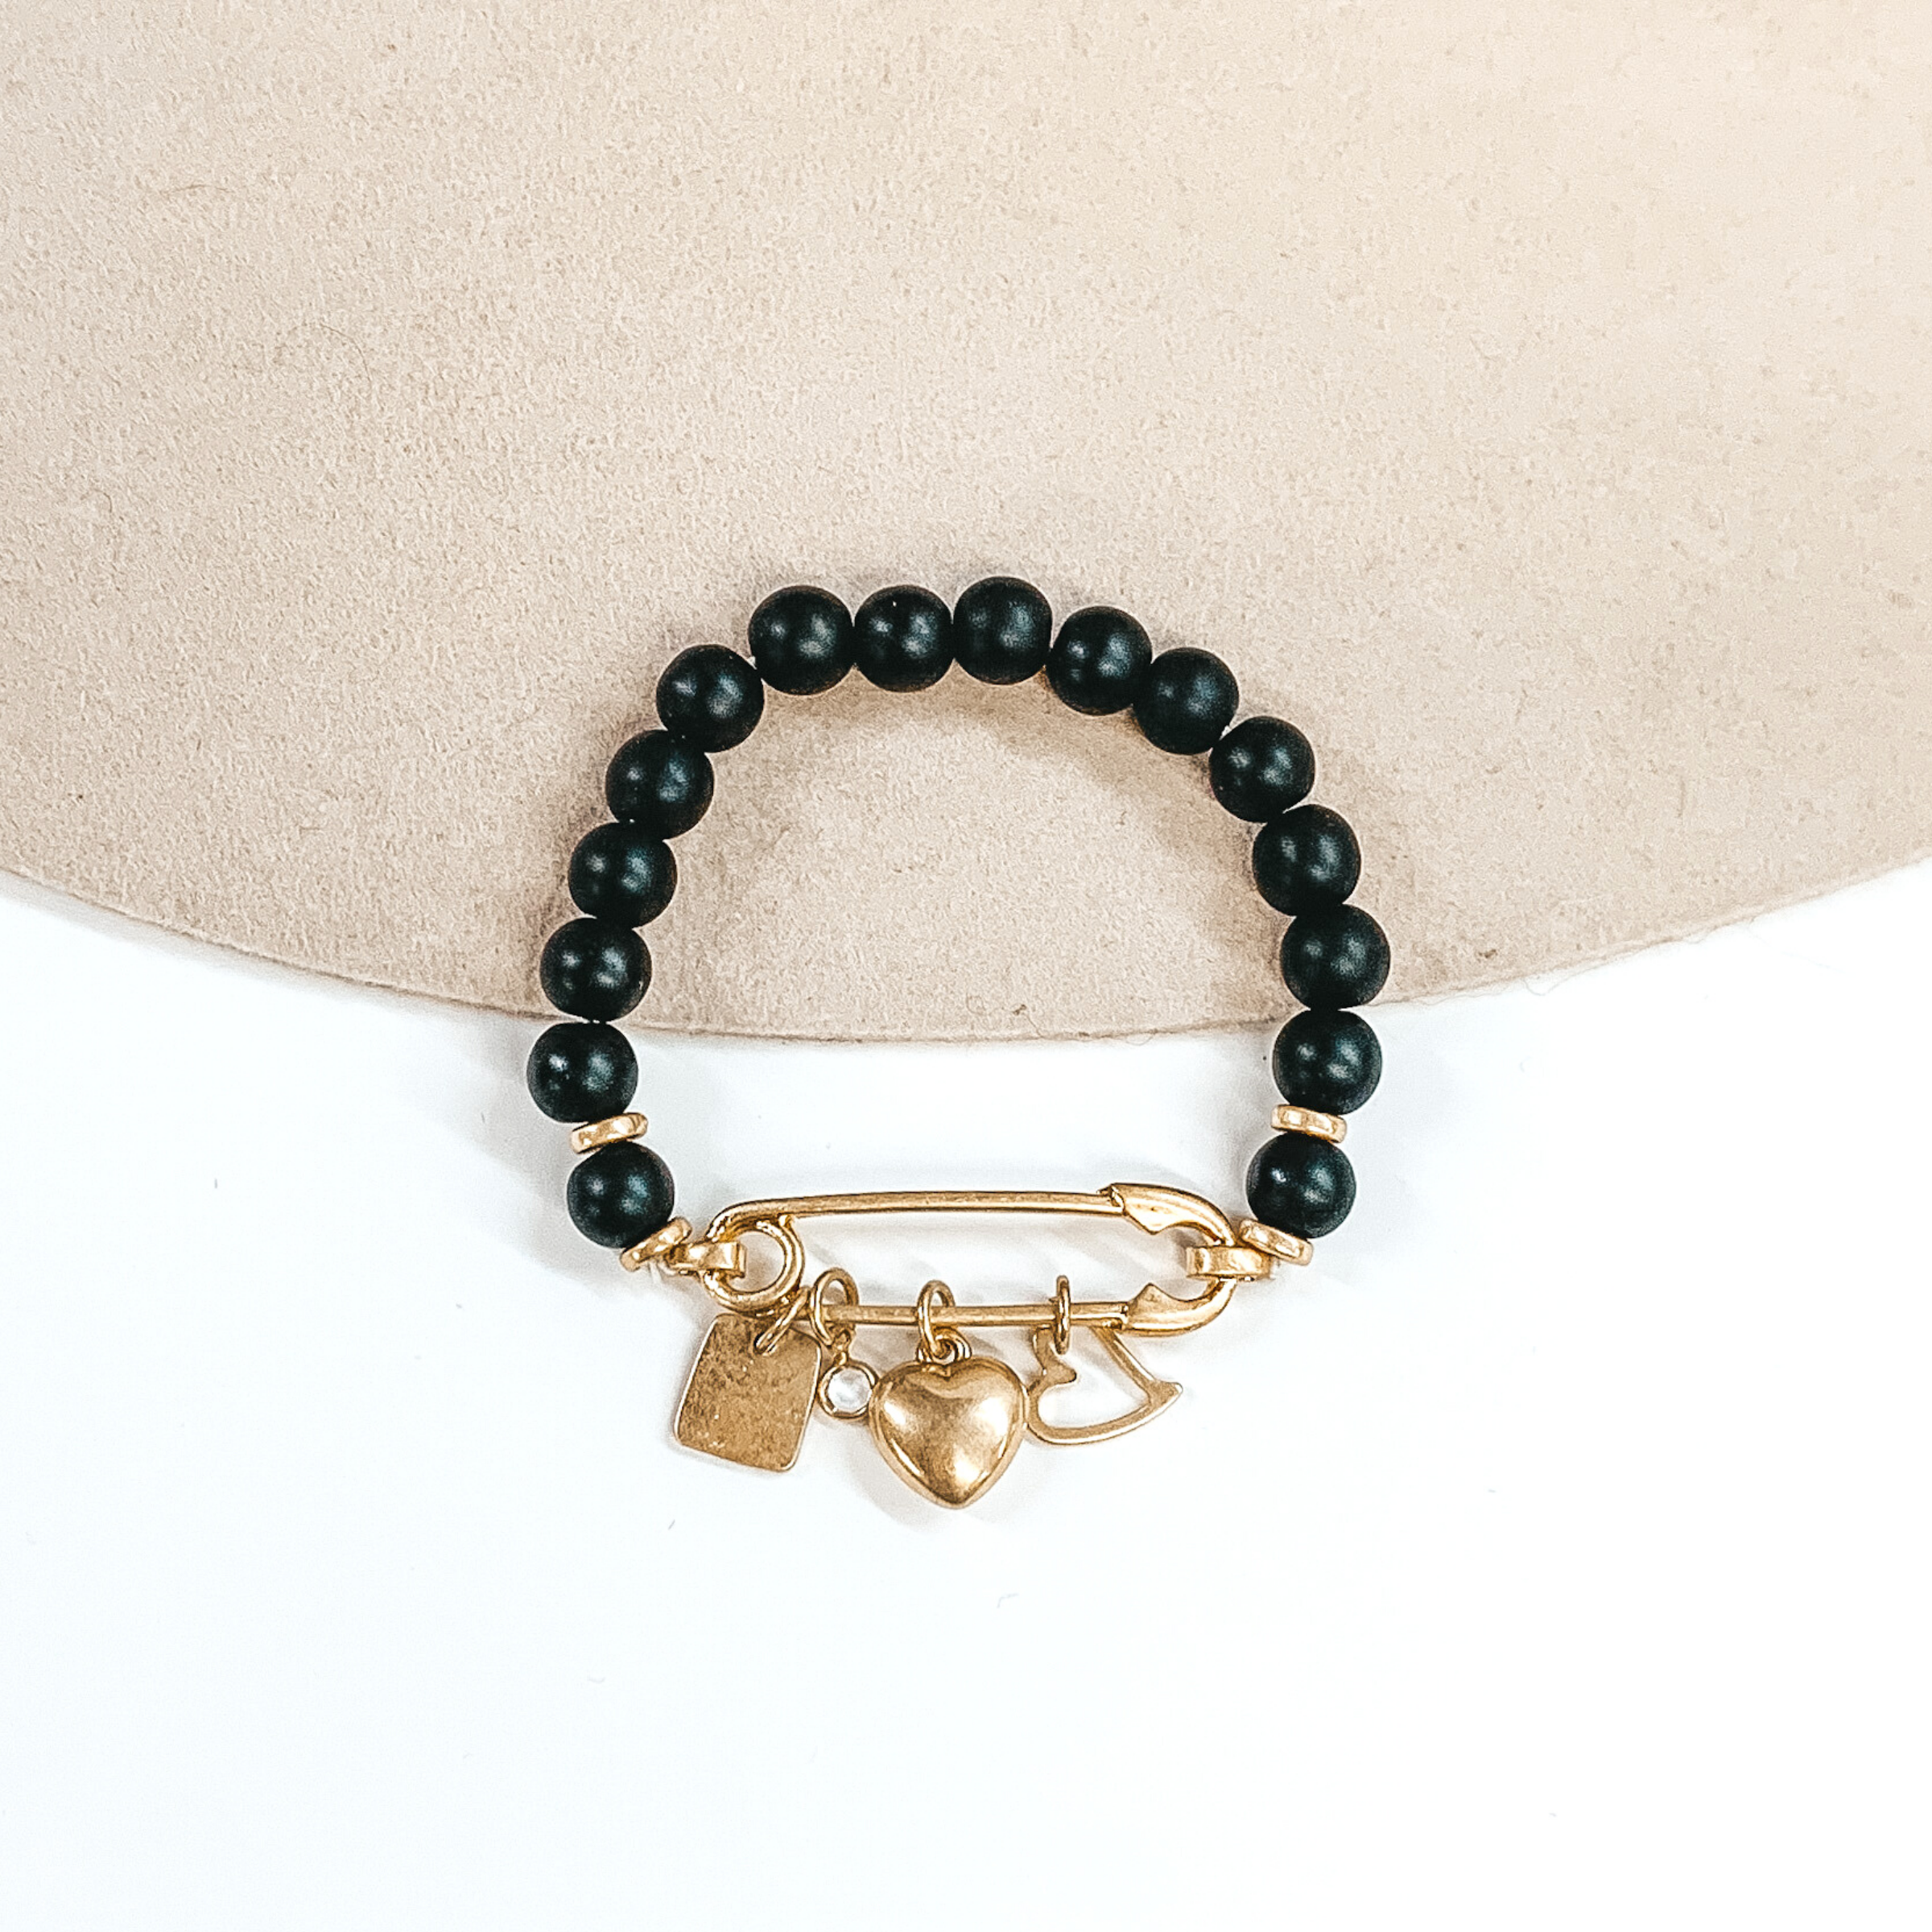 This is a black beaded bracelet with a safety pin pendant closing the ends of the bracelet. Hanging on the gold safety pin are four gold charms including a square, a clear crystal, a heart, and an outlined heart. This bracelet is pictured on a beige and white background.